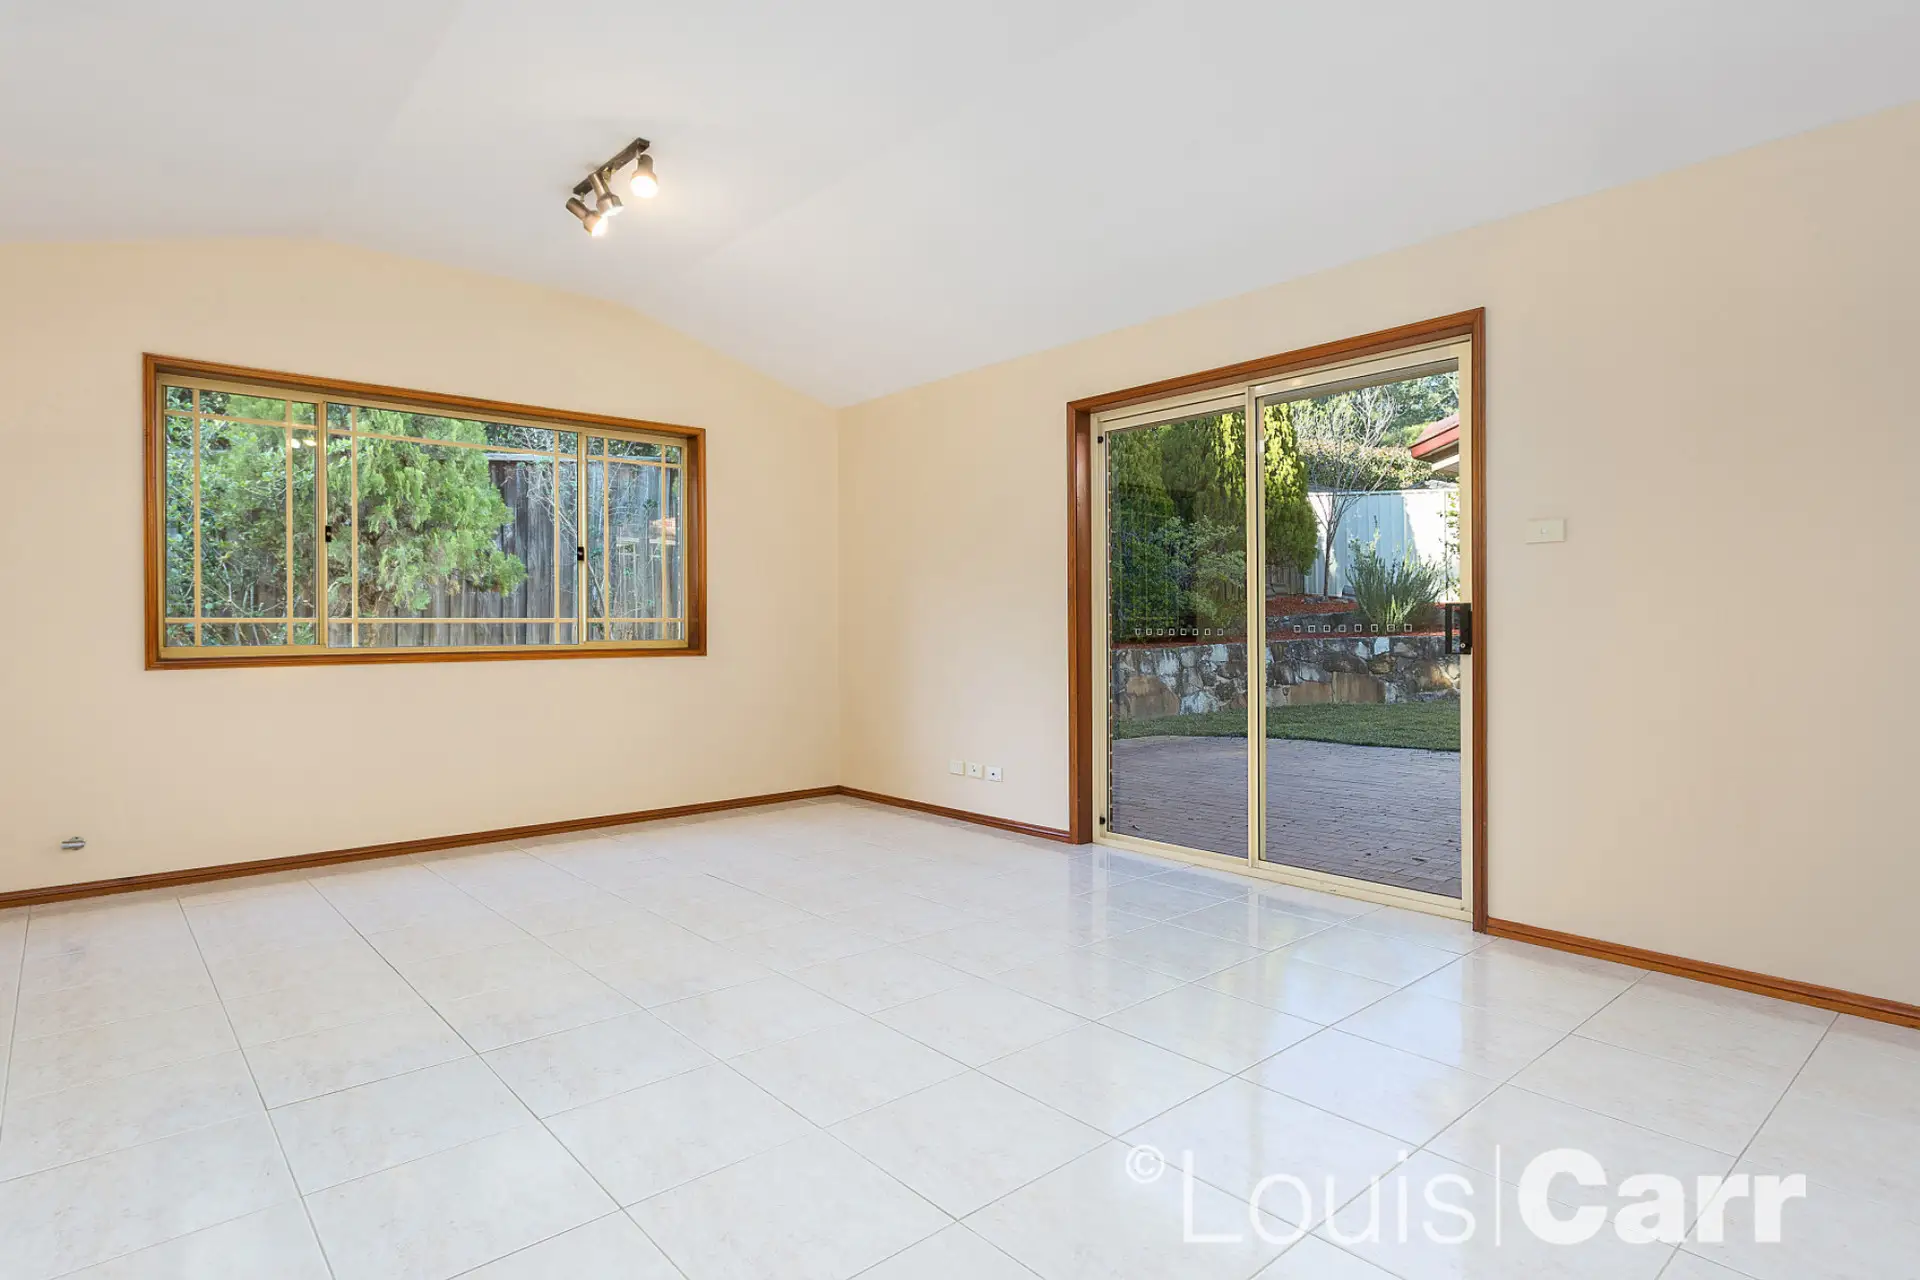 Photo #3: 9 Parkwood Close, Castle Hill - Sold by Louis Carr Real Estate